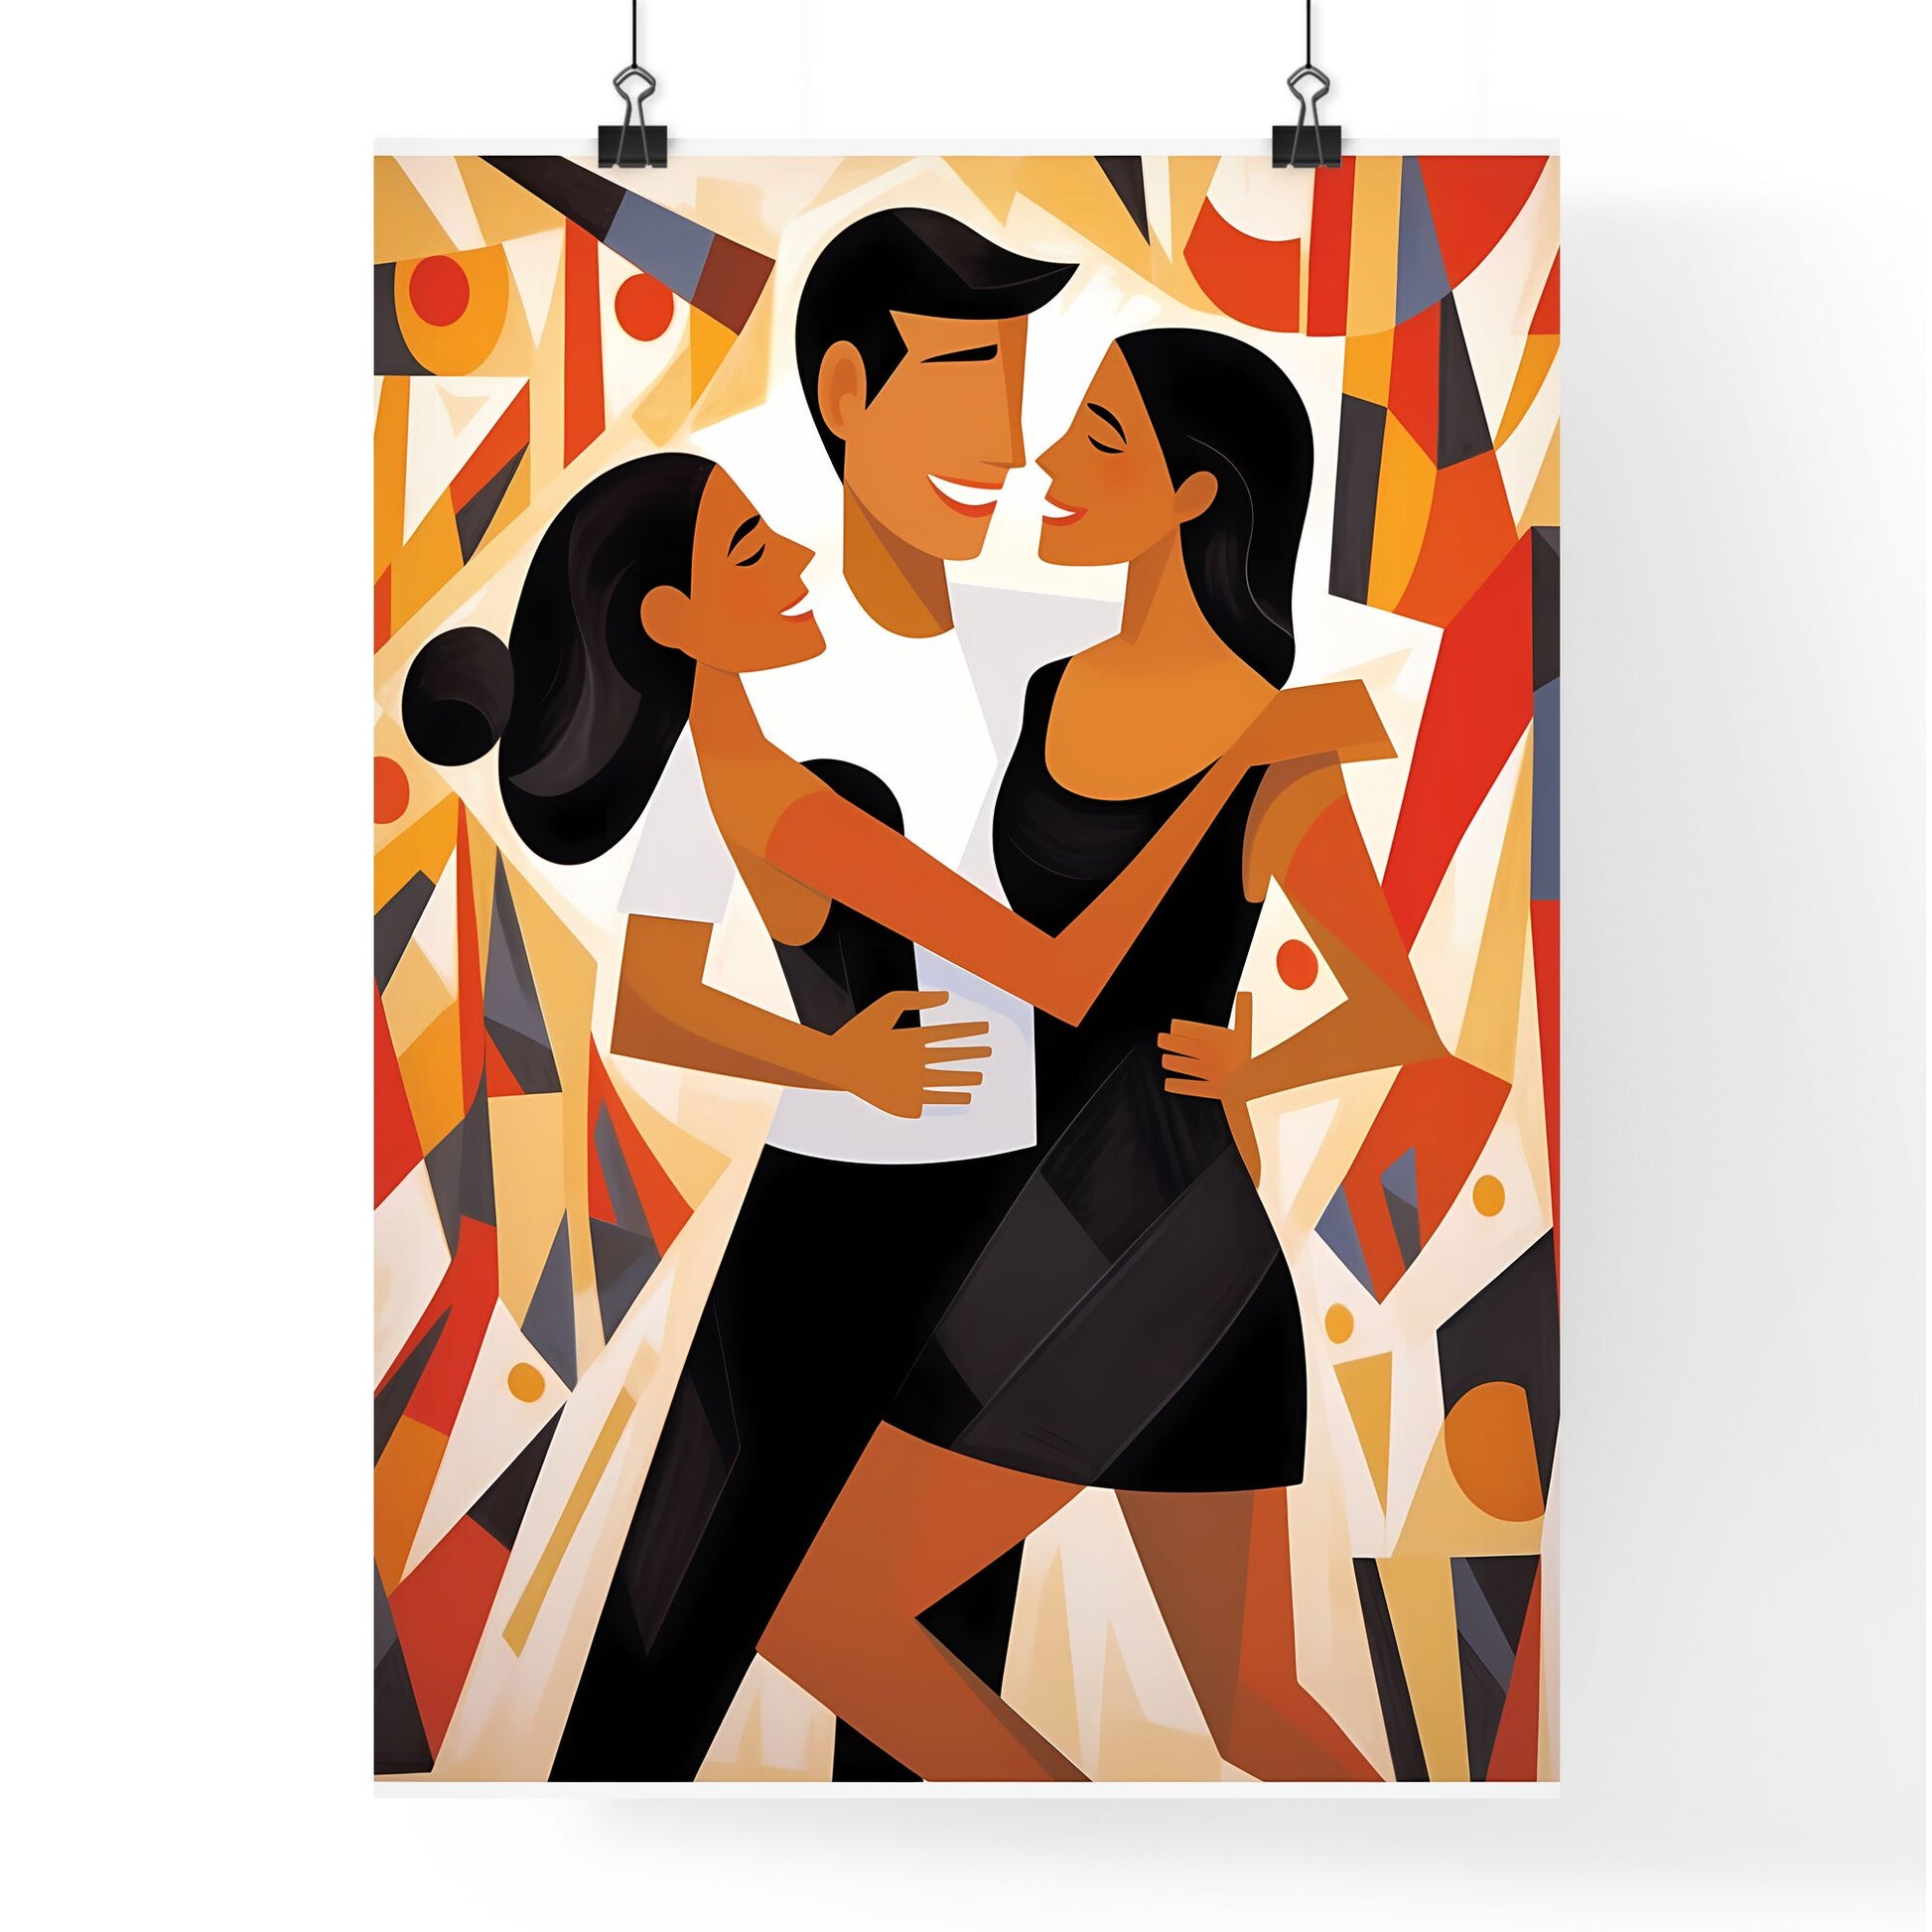 Man And Woman Hugging Each Other Art Print Default Title